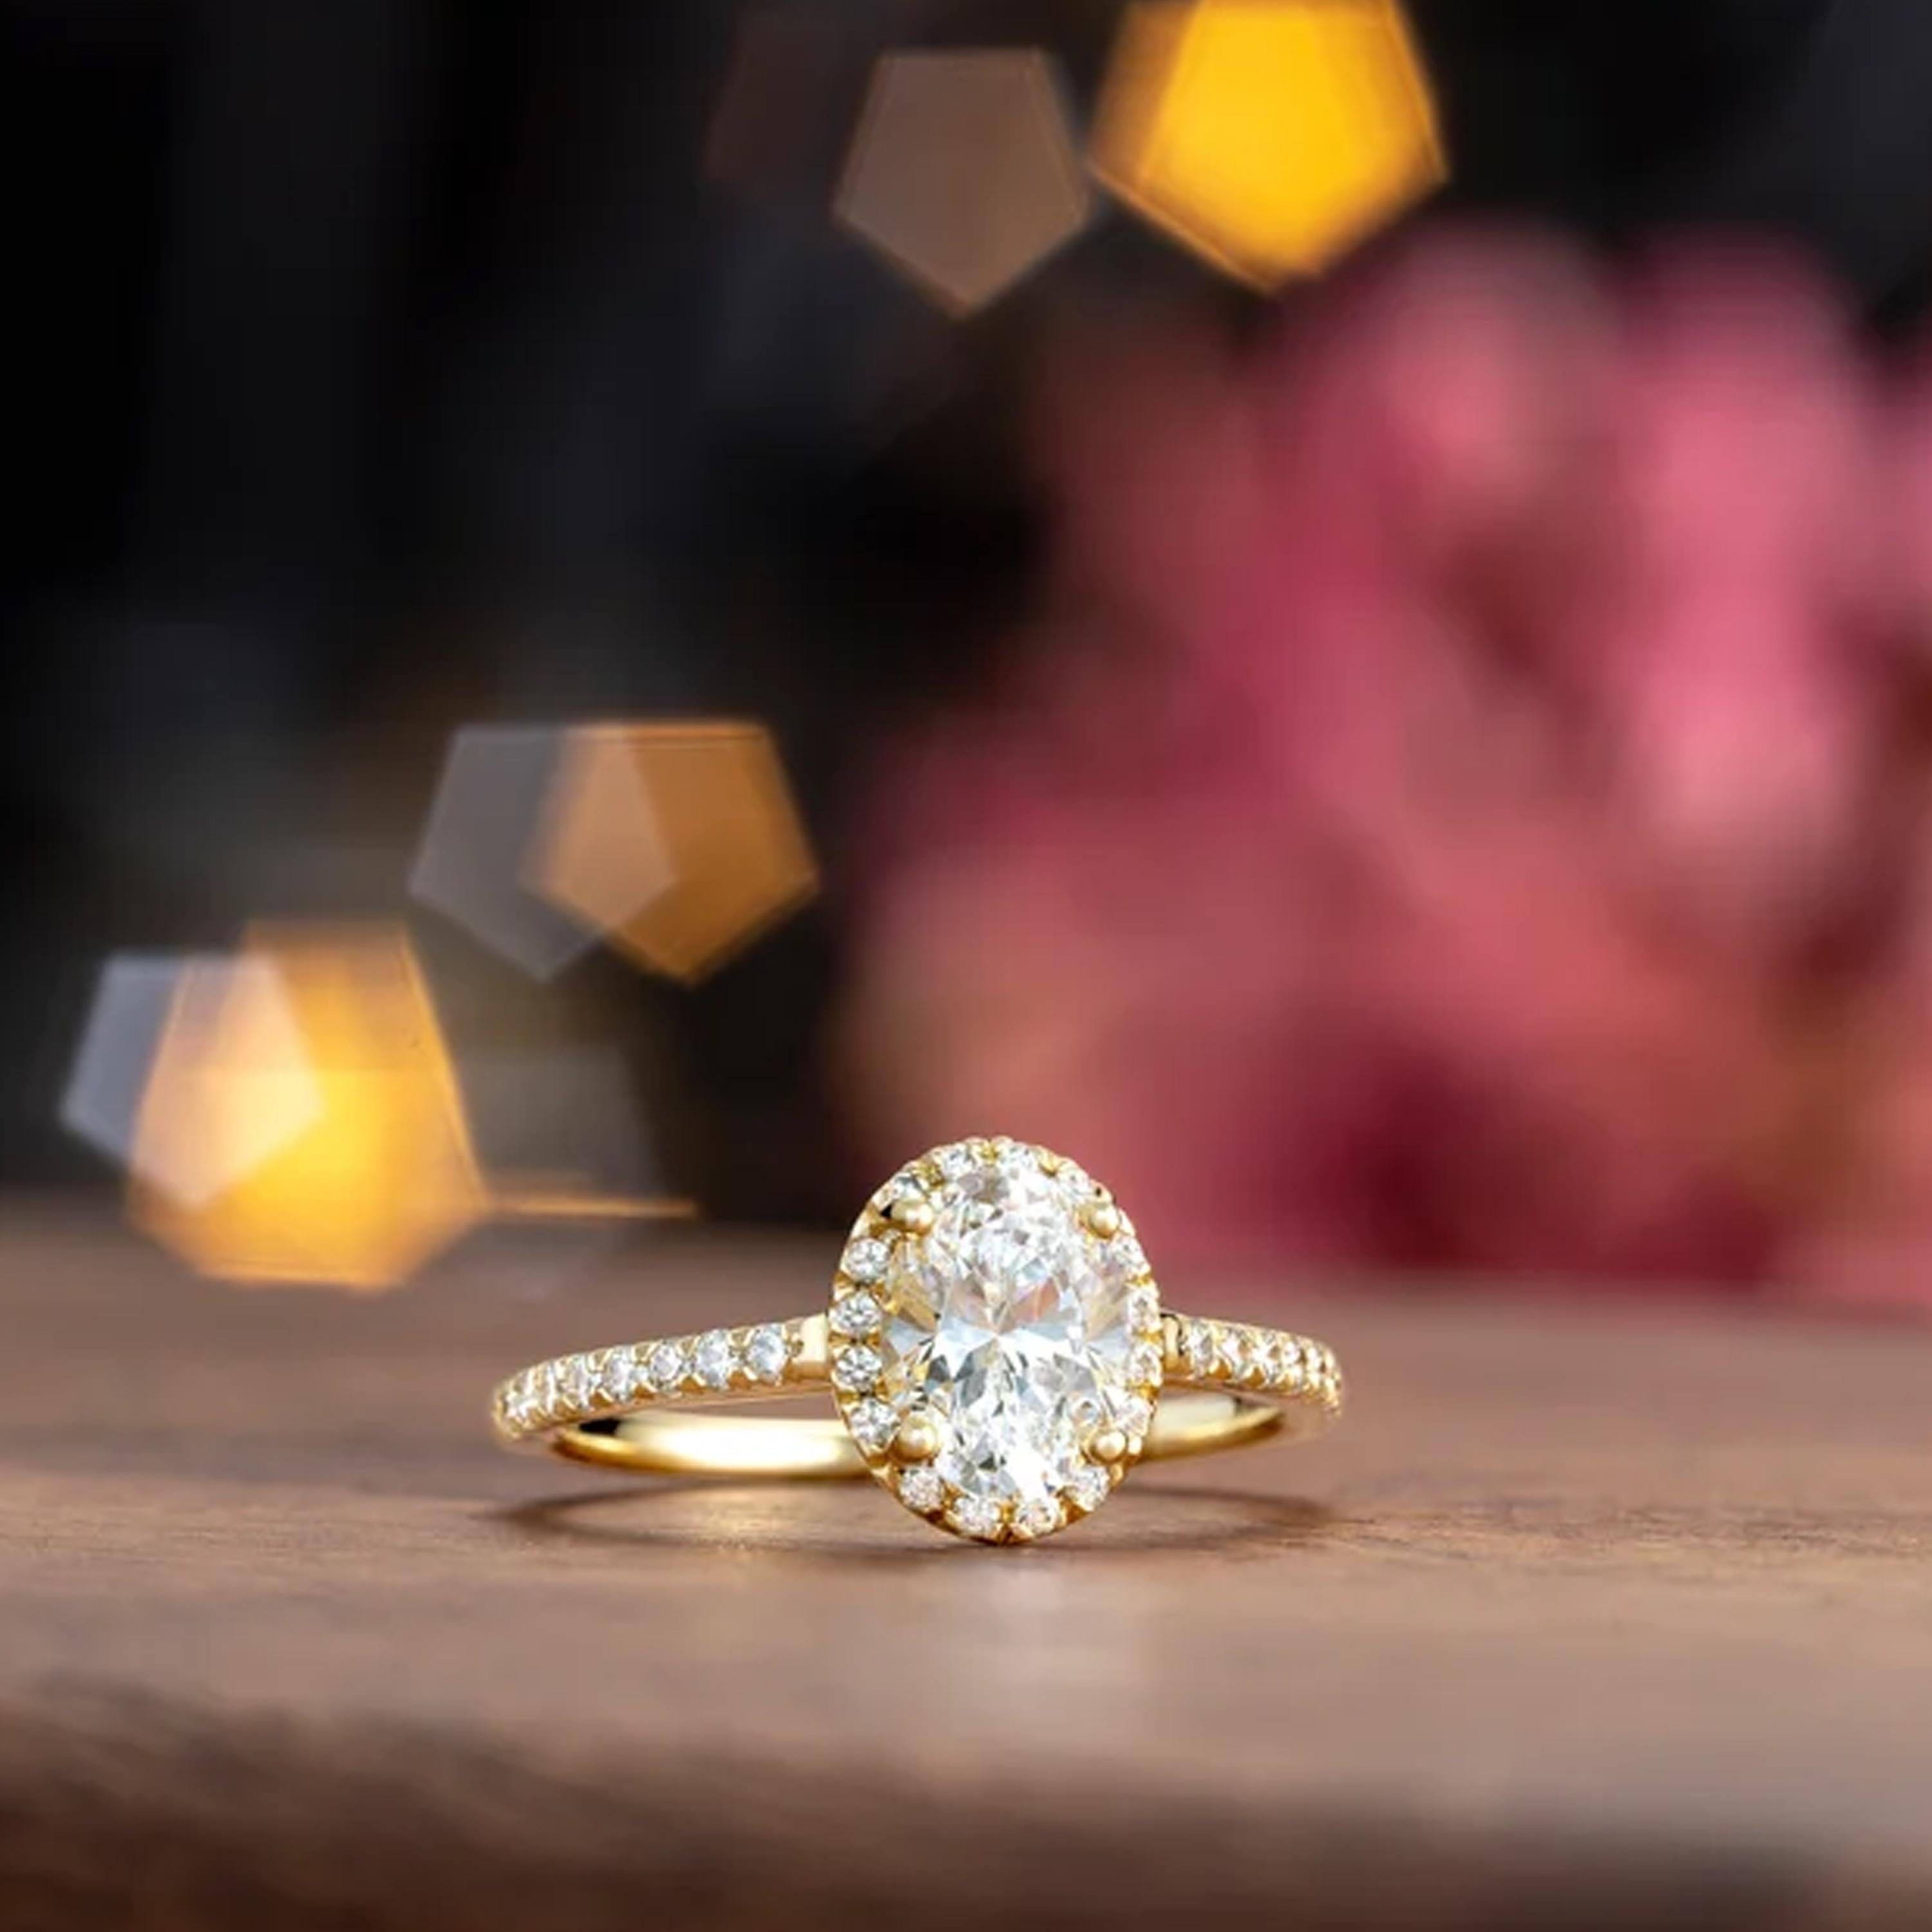 Closely set together with exposed sides, the French pave diamonds are exposed to maximum light exposure. Shimmering natural white diamonds surround the halo and with maximum brilliance amplify the GIA certified center oval diamond. Additional